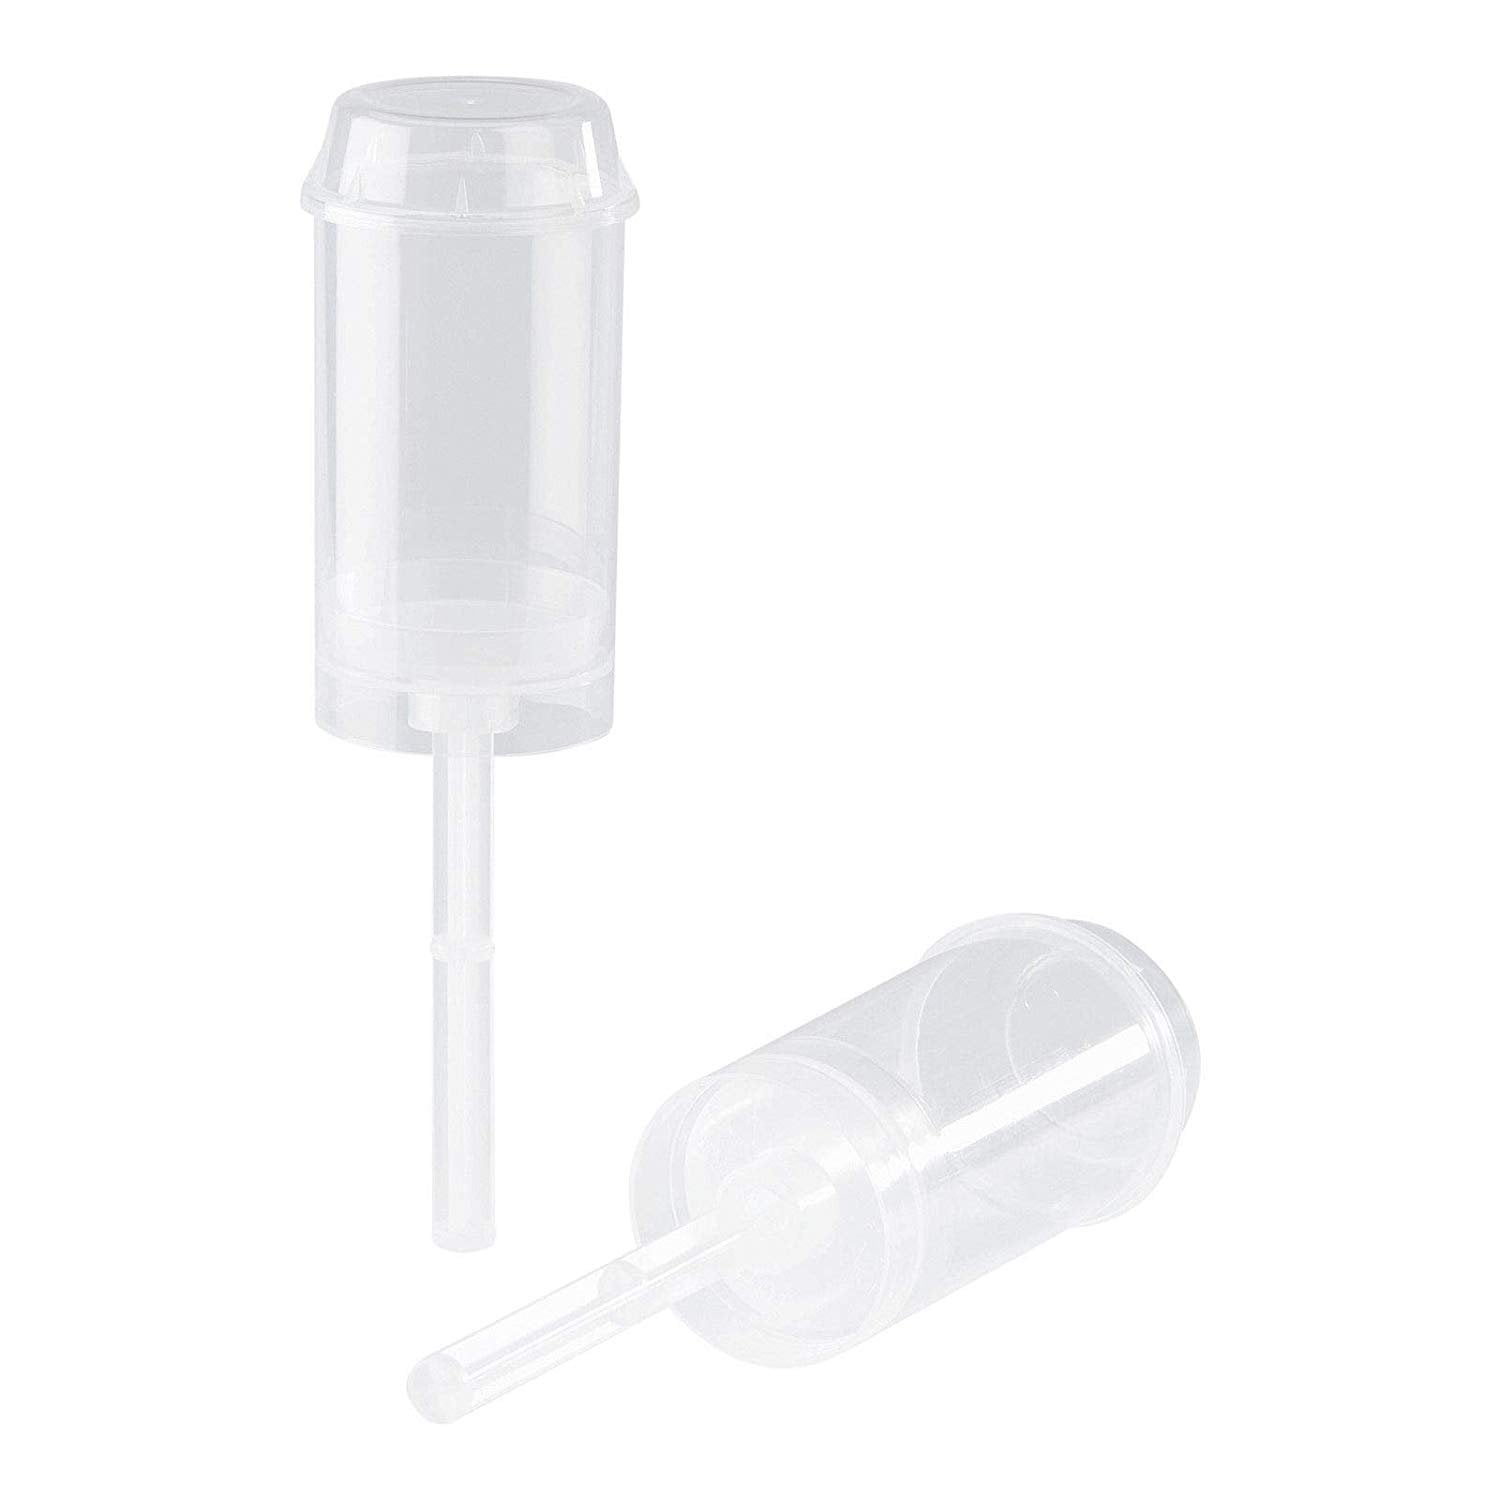 Wholesale Plastic Cake Push Up Pop Containers 